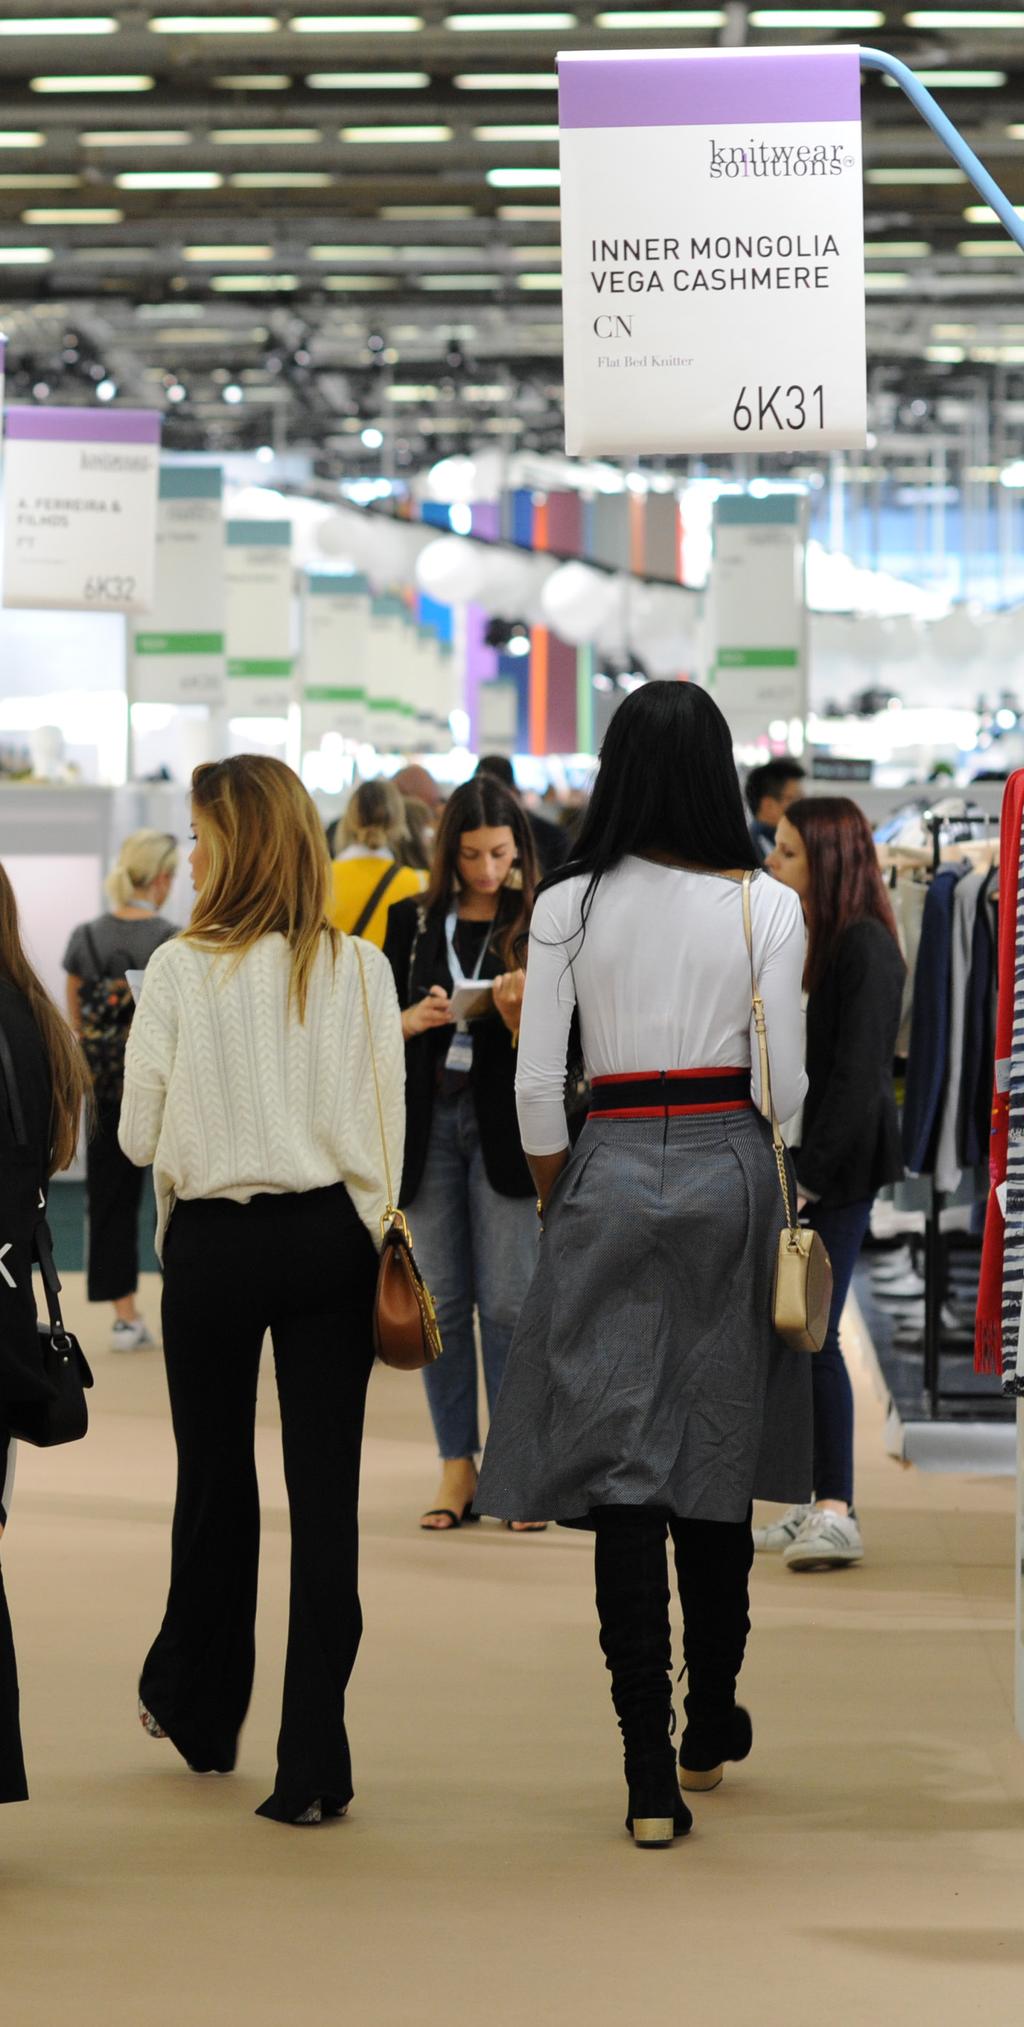 KNITWEAR SOLUTIONS TARGET WHO ARE THE VISITORS? VISITORS, an international target The KNITWEAR SOLUTIONS exhibitors welcomed high-quality visitors, comprised of product managers, buyers and designers.